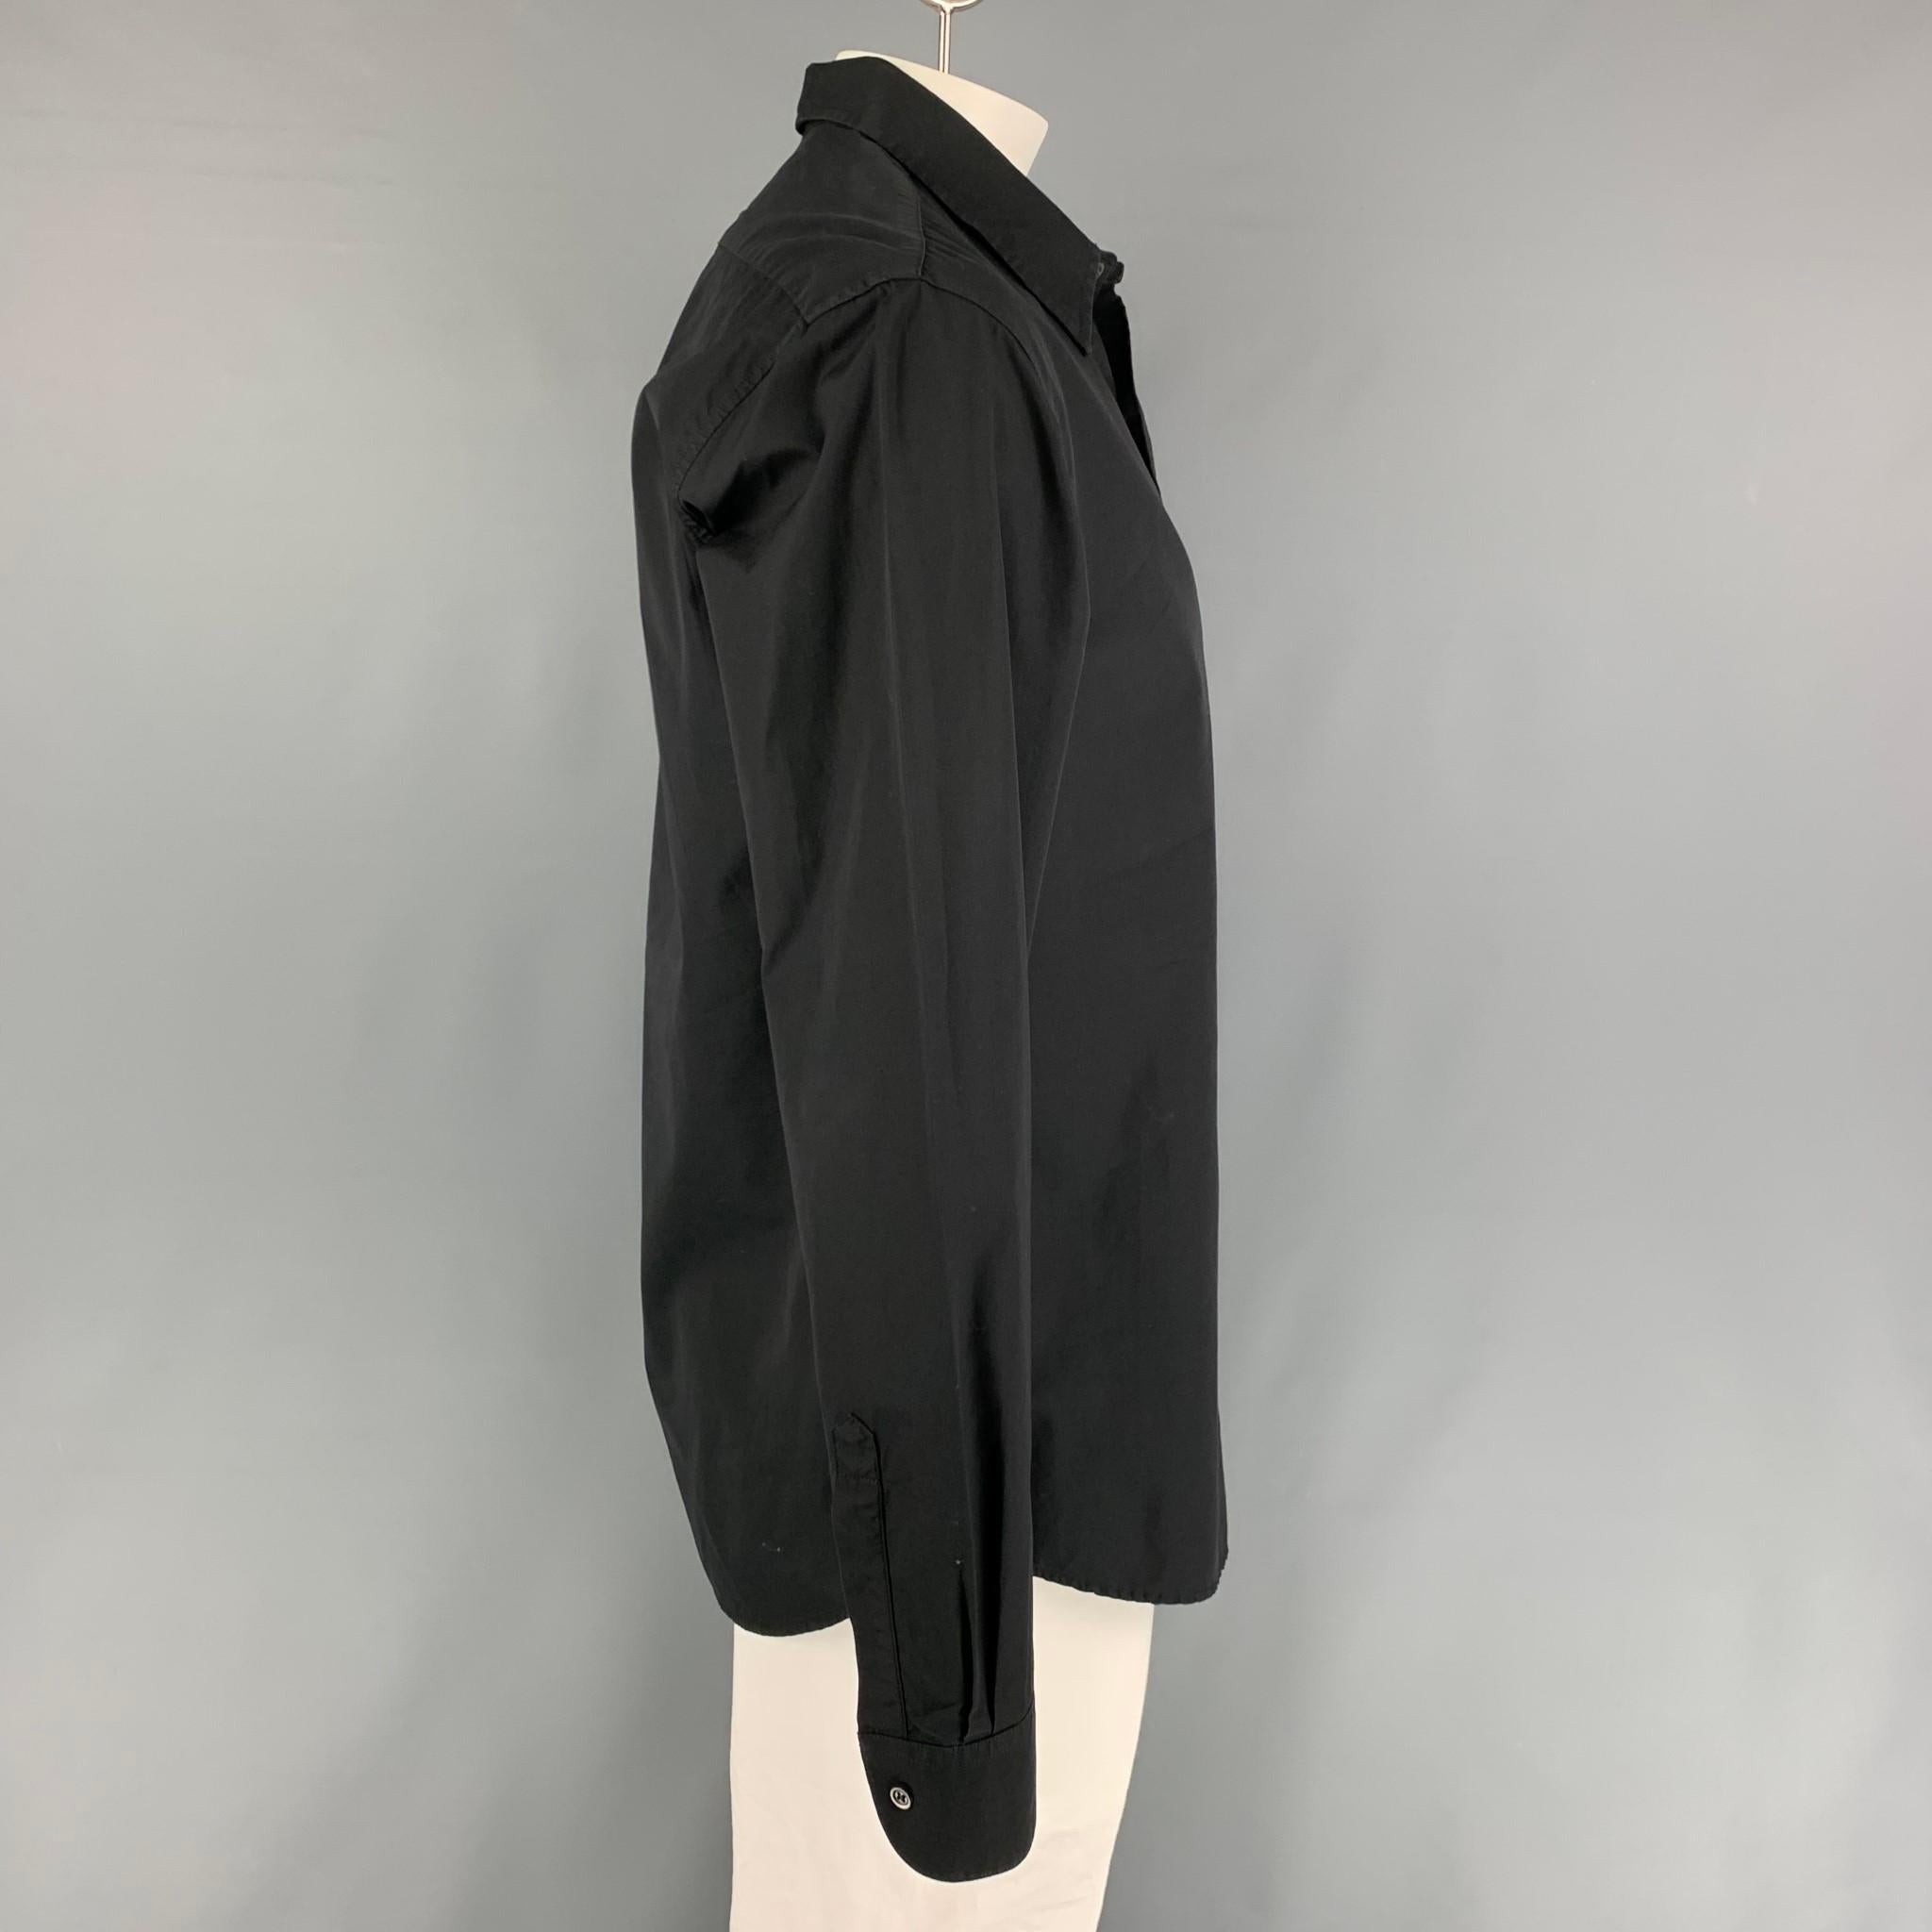 BARENA long sleeve shirt comes in a black cotton featuring a spread collar and a hidden placket closure. Made in Italy.

Very Good Pre-Owned Condition.
Marked: 54

Measurements:

Shoulder: 19 in.
Chest: 44 in.
Sleeve: 27.5 in.
Length: 32 in. 